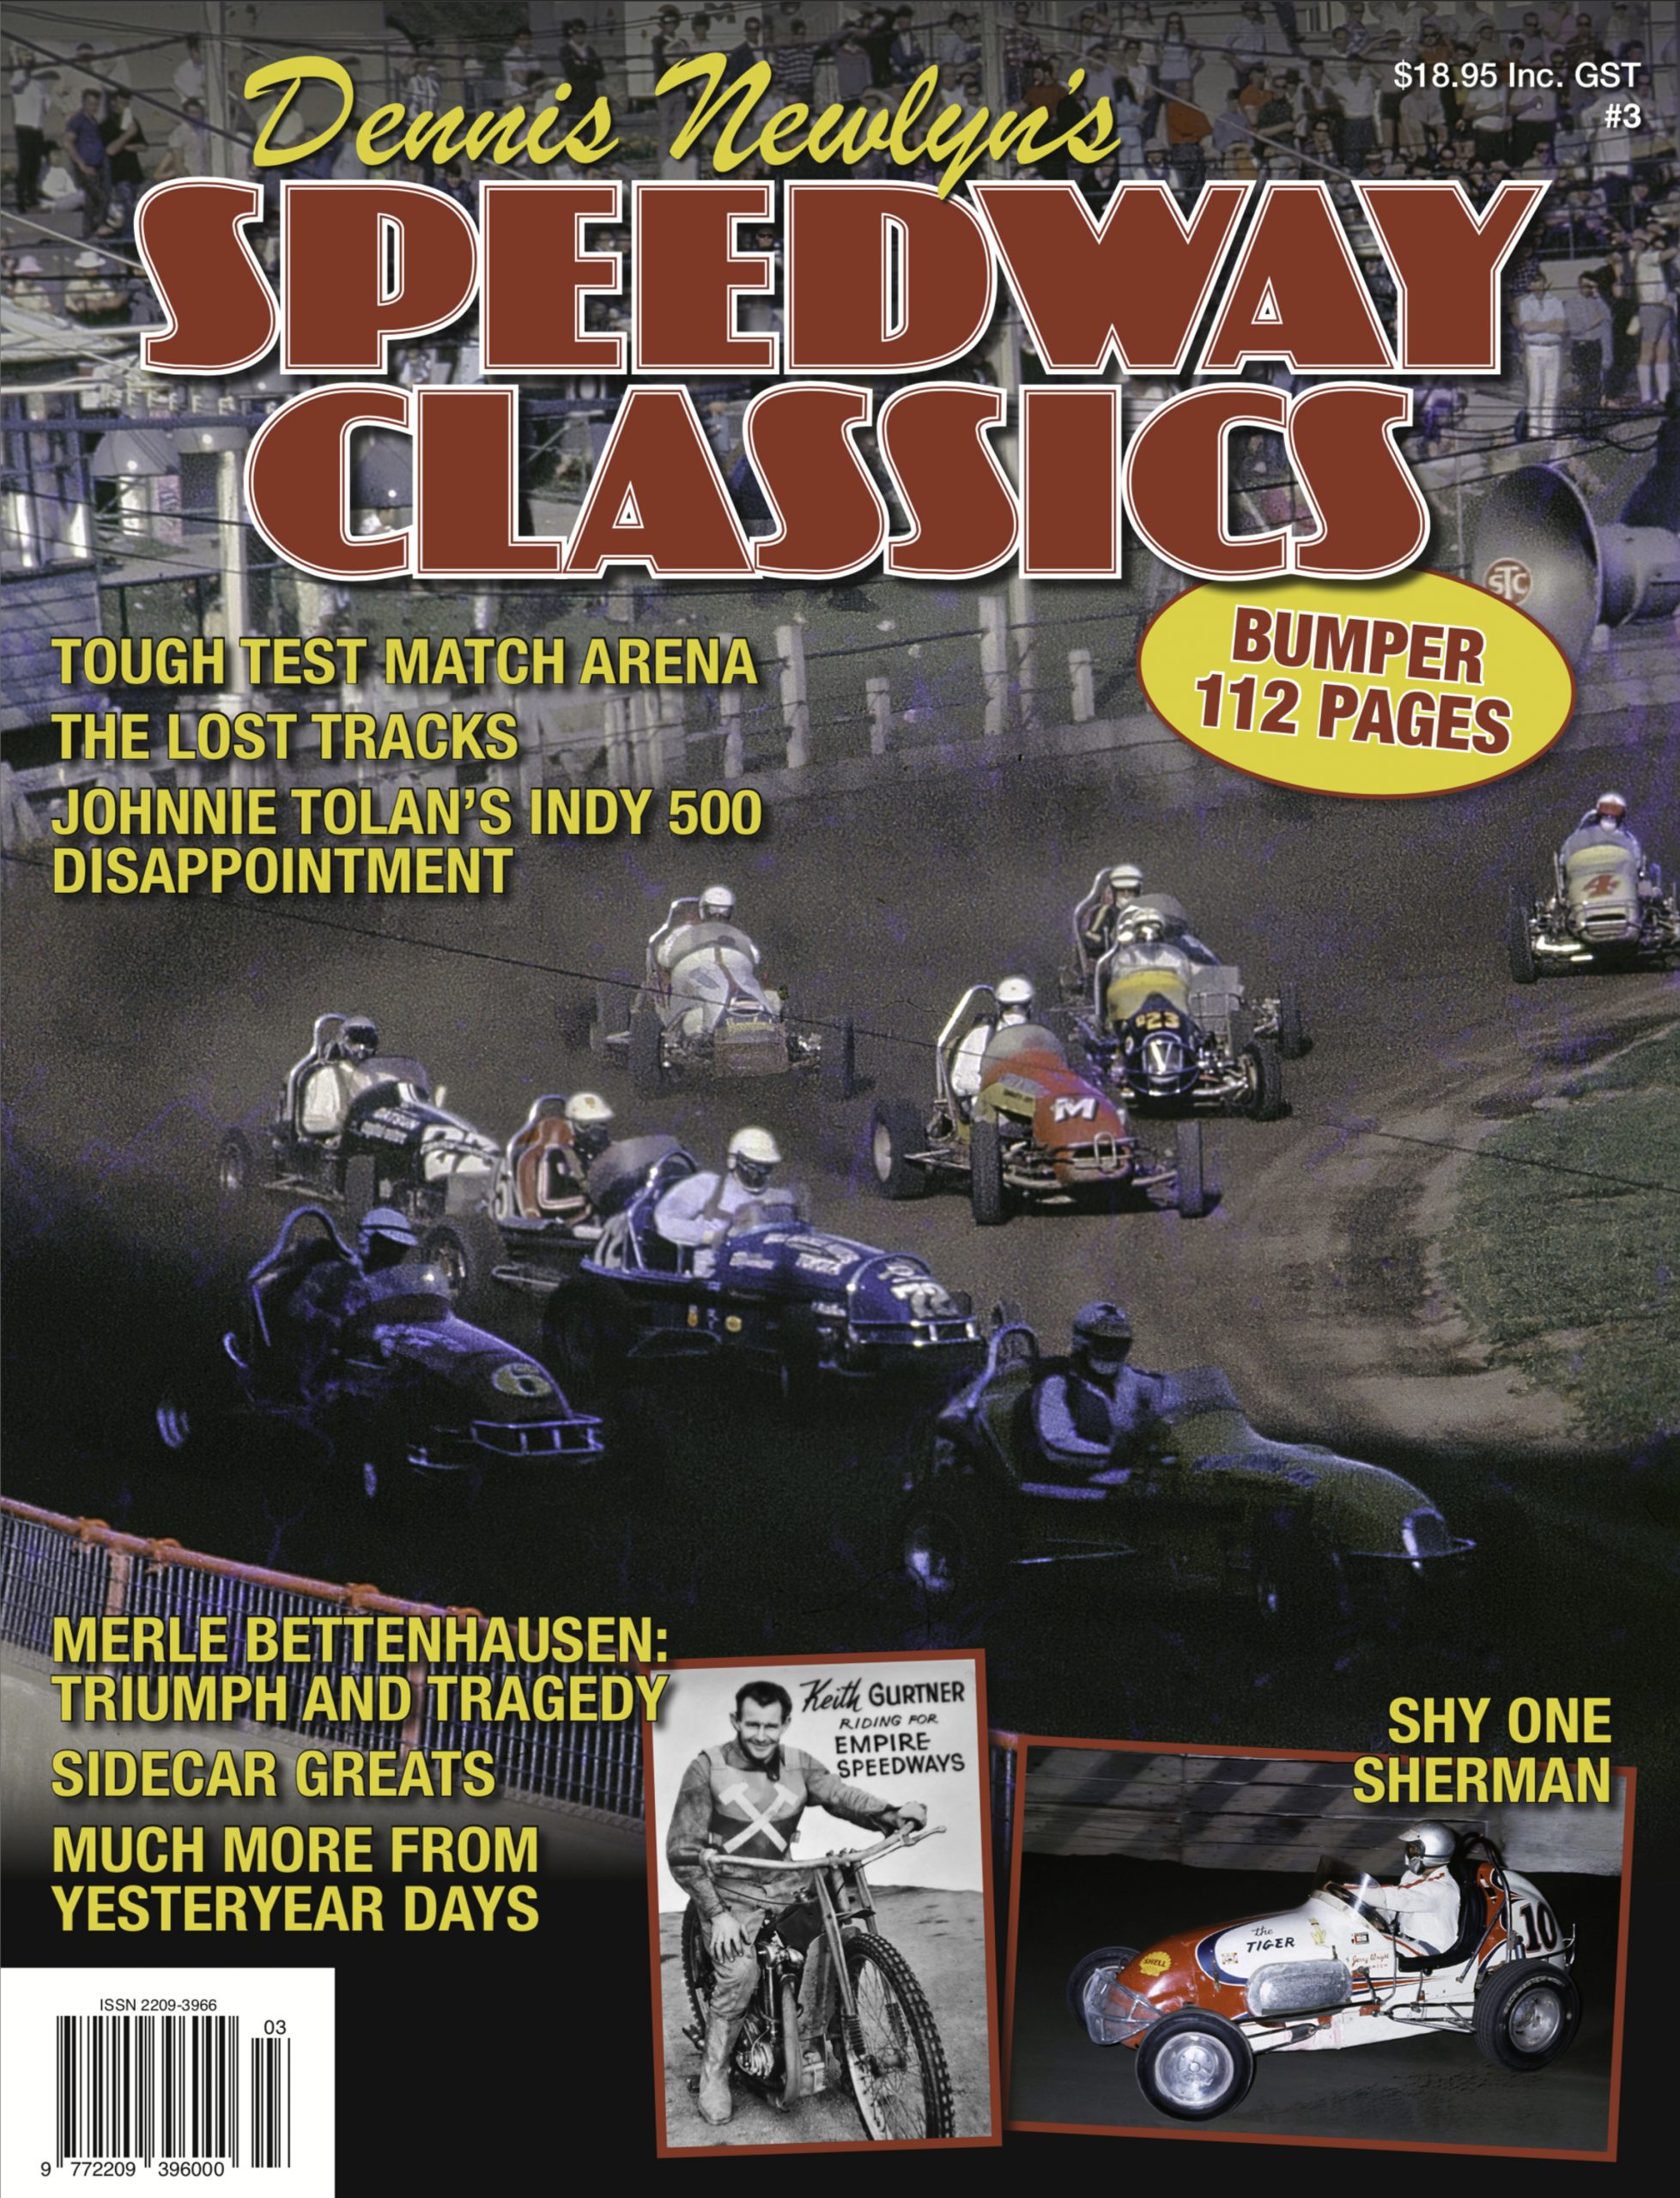 SPEEDWAY CLASSICS #3 2021 Front Cover.